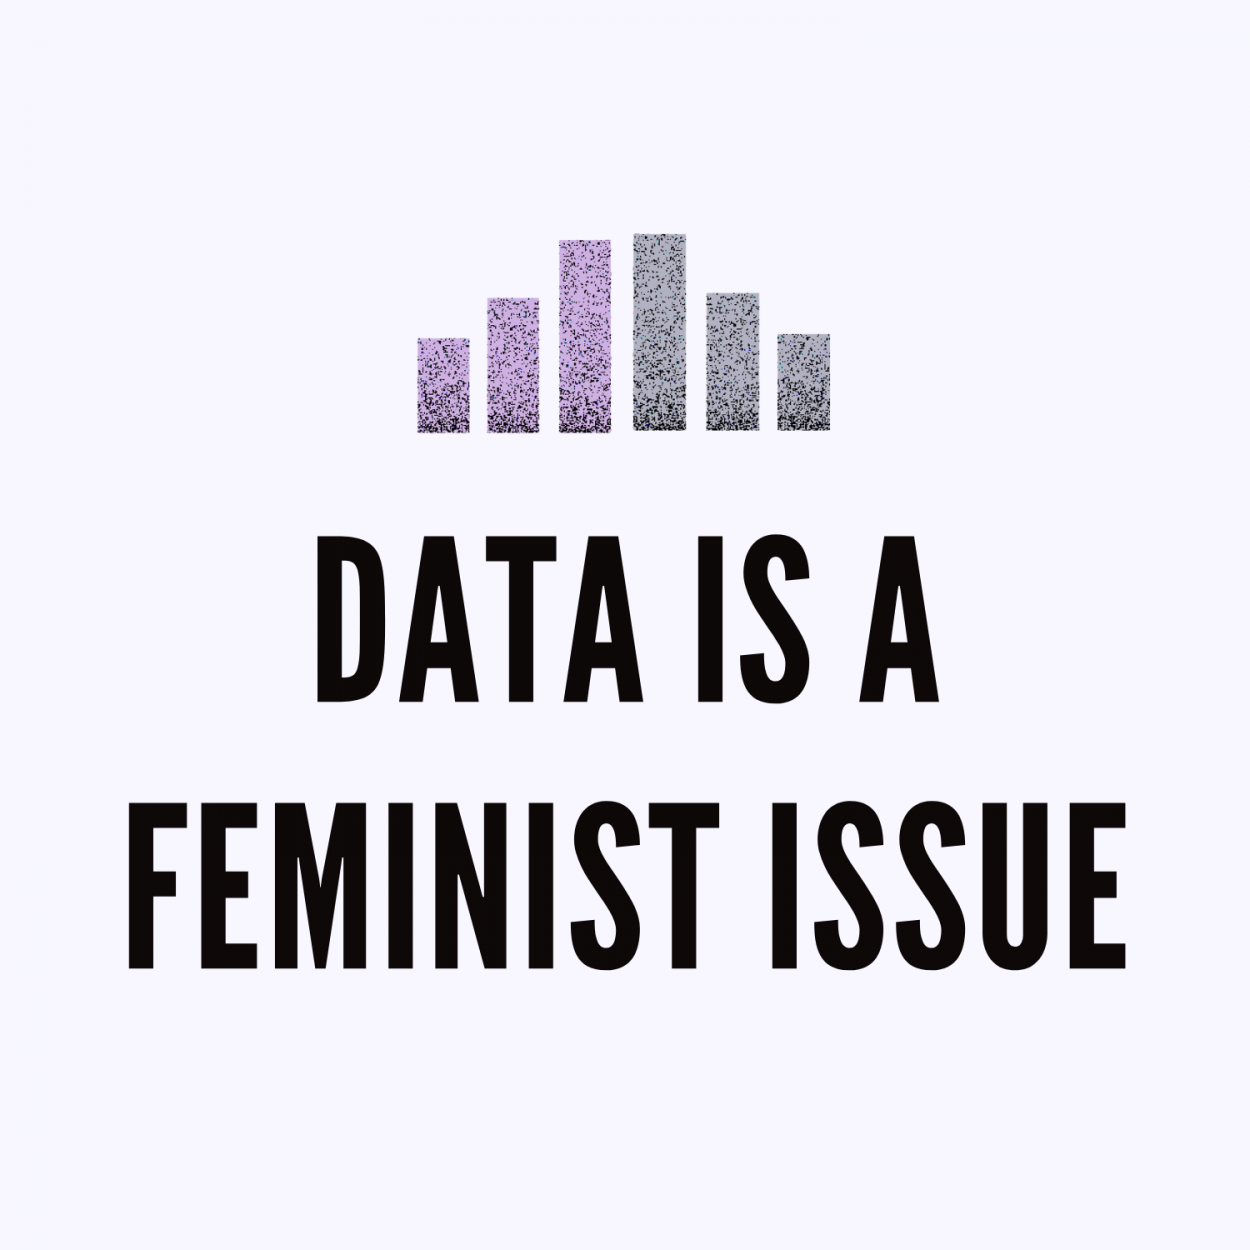 Black text on mauve background reads "data is a feminist issue" above the text is a column graphs. the three columns of the left of the graph are purple and grow taller as they reach the centre, and the columns to the right of the graph shrink. the overall shape of the graph is a pyramid.